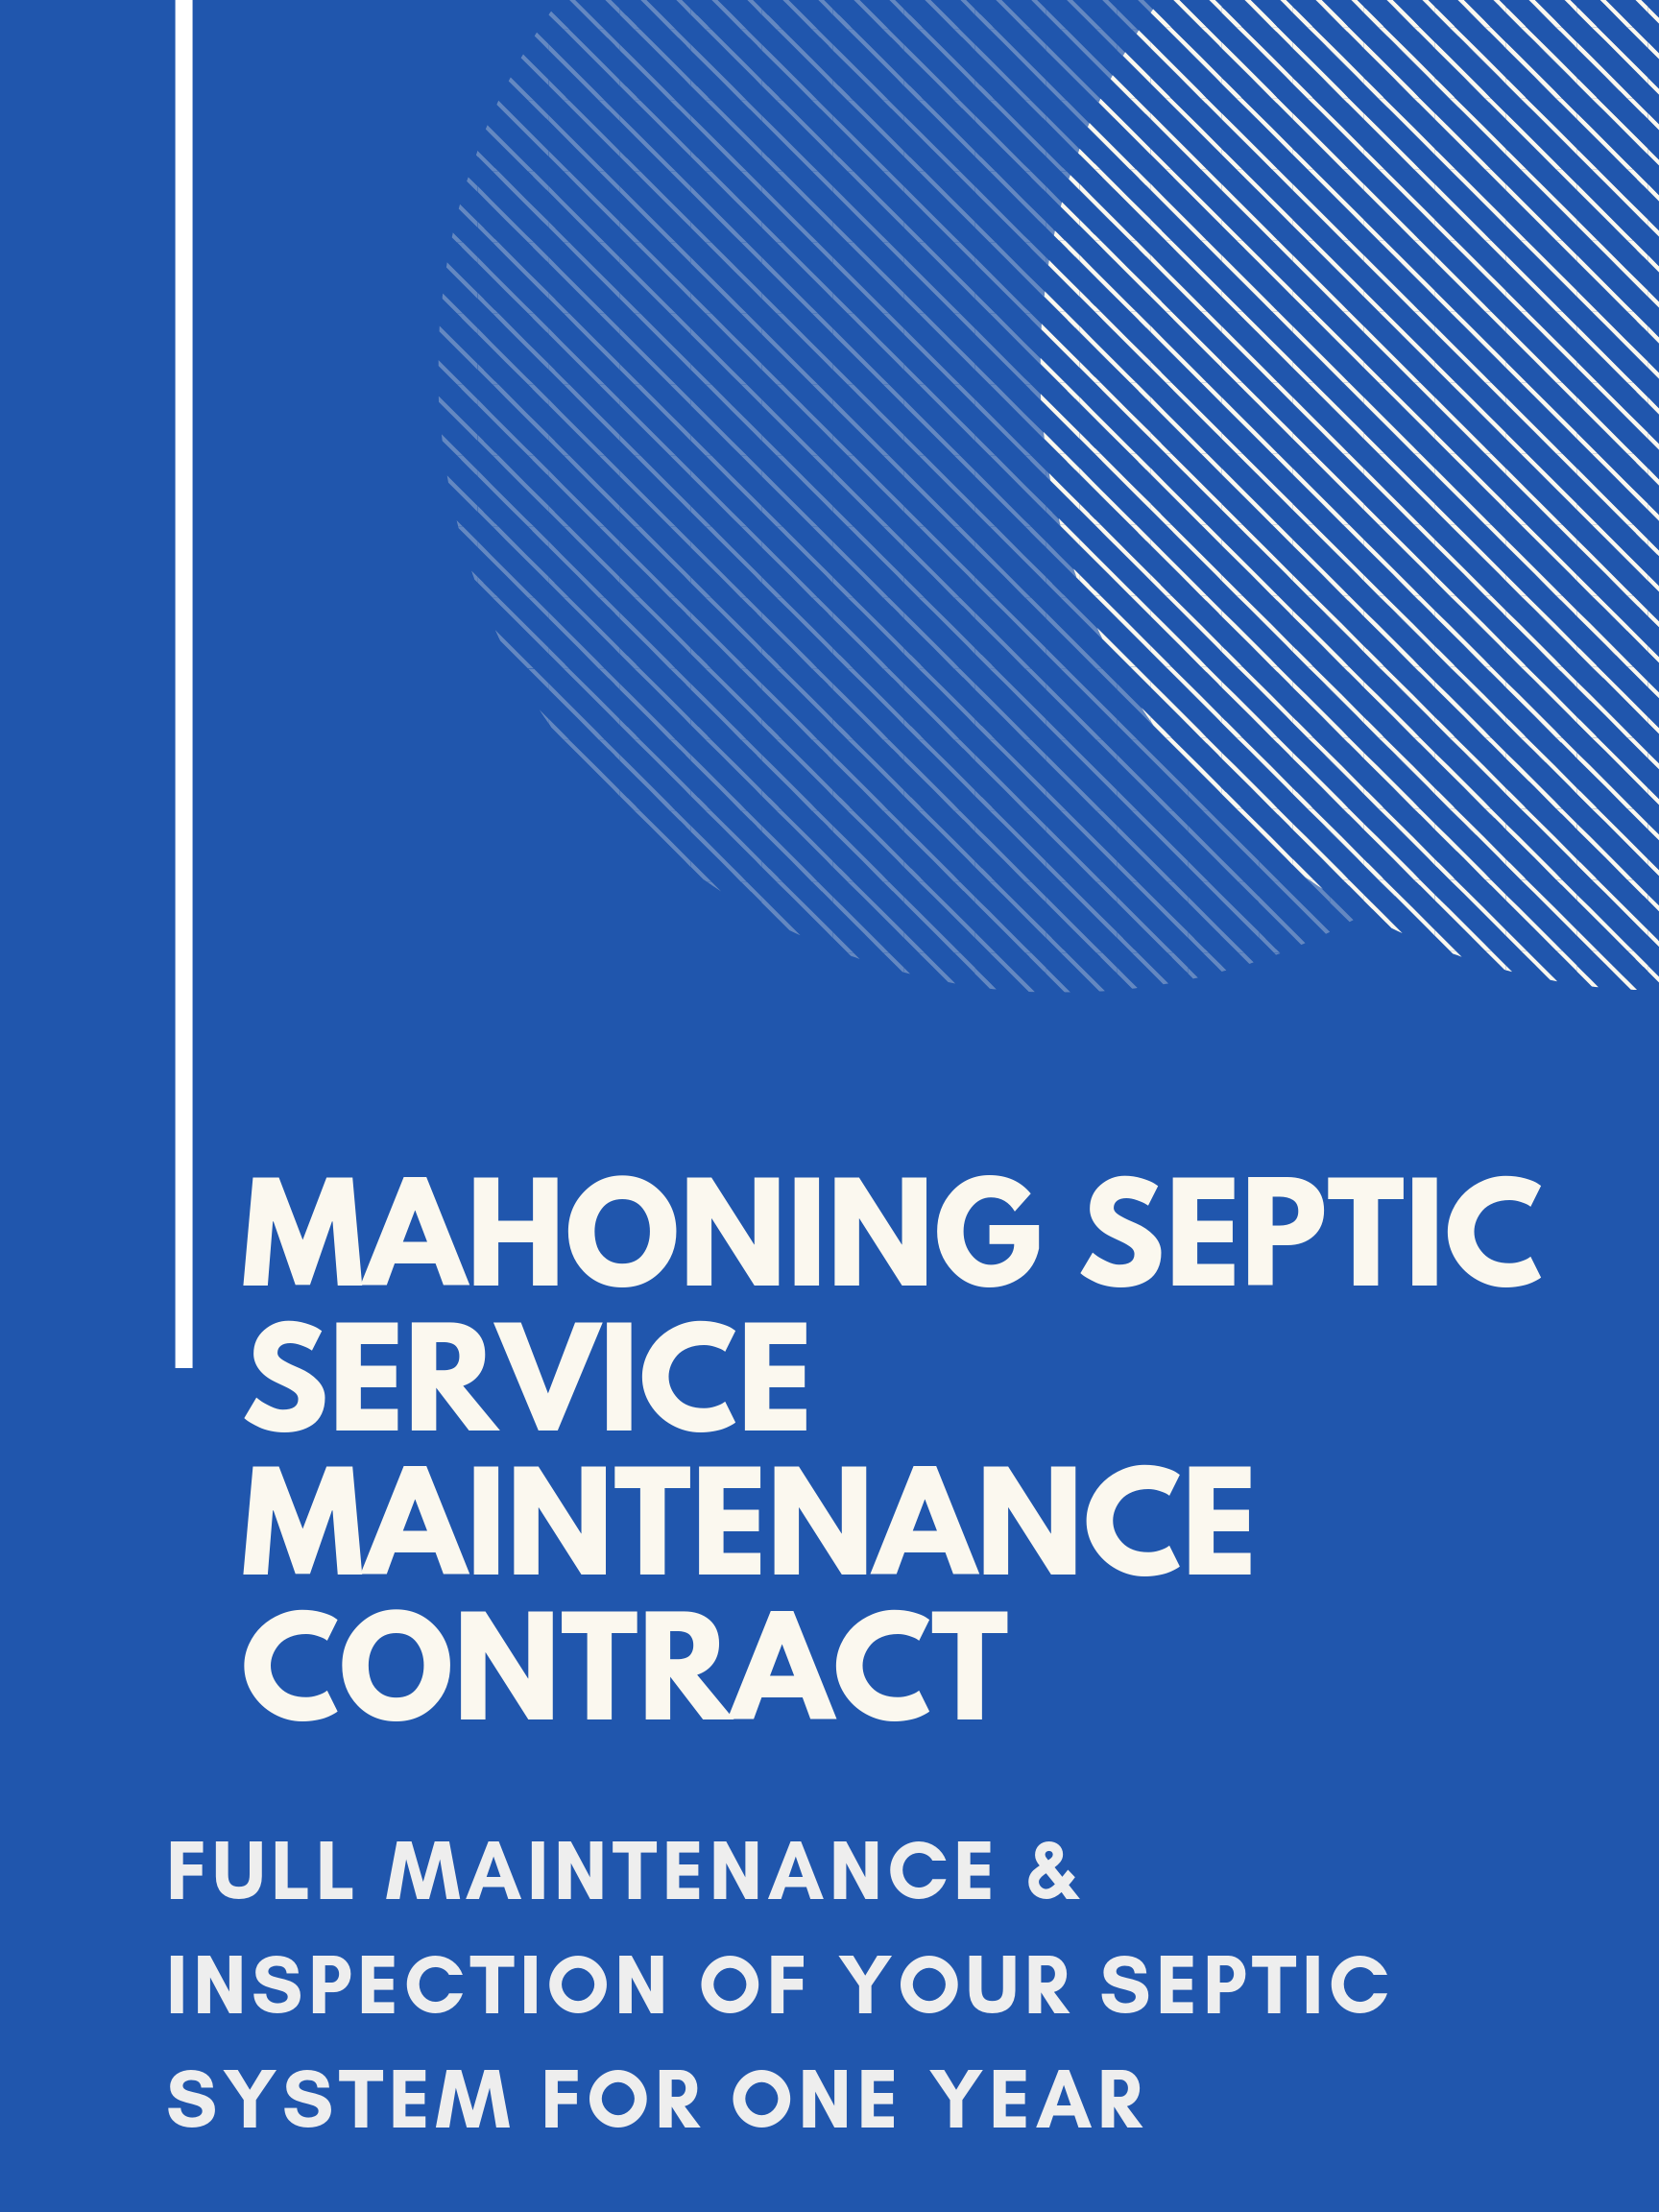 Aeration Septic - Mahoning County Certified Septic Tank Inspections